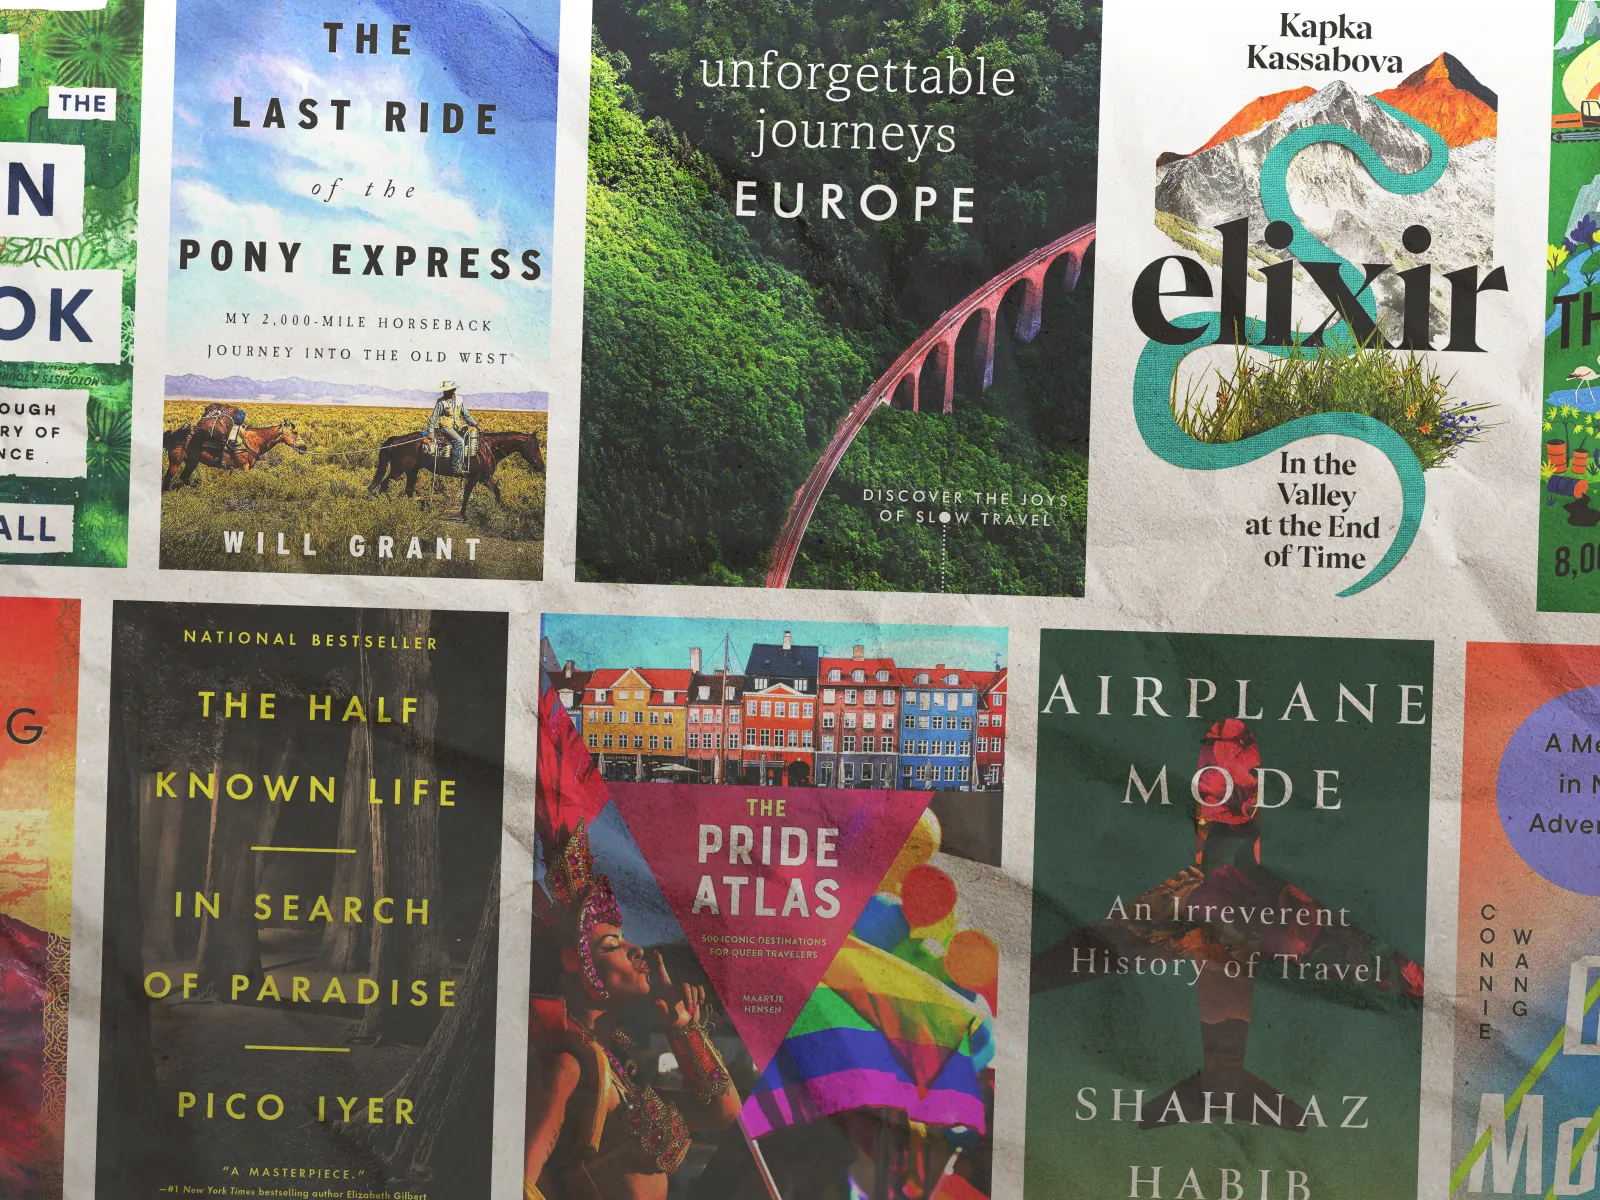 Ten New Travel Books to Read When You're Stuck at Home